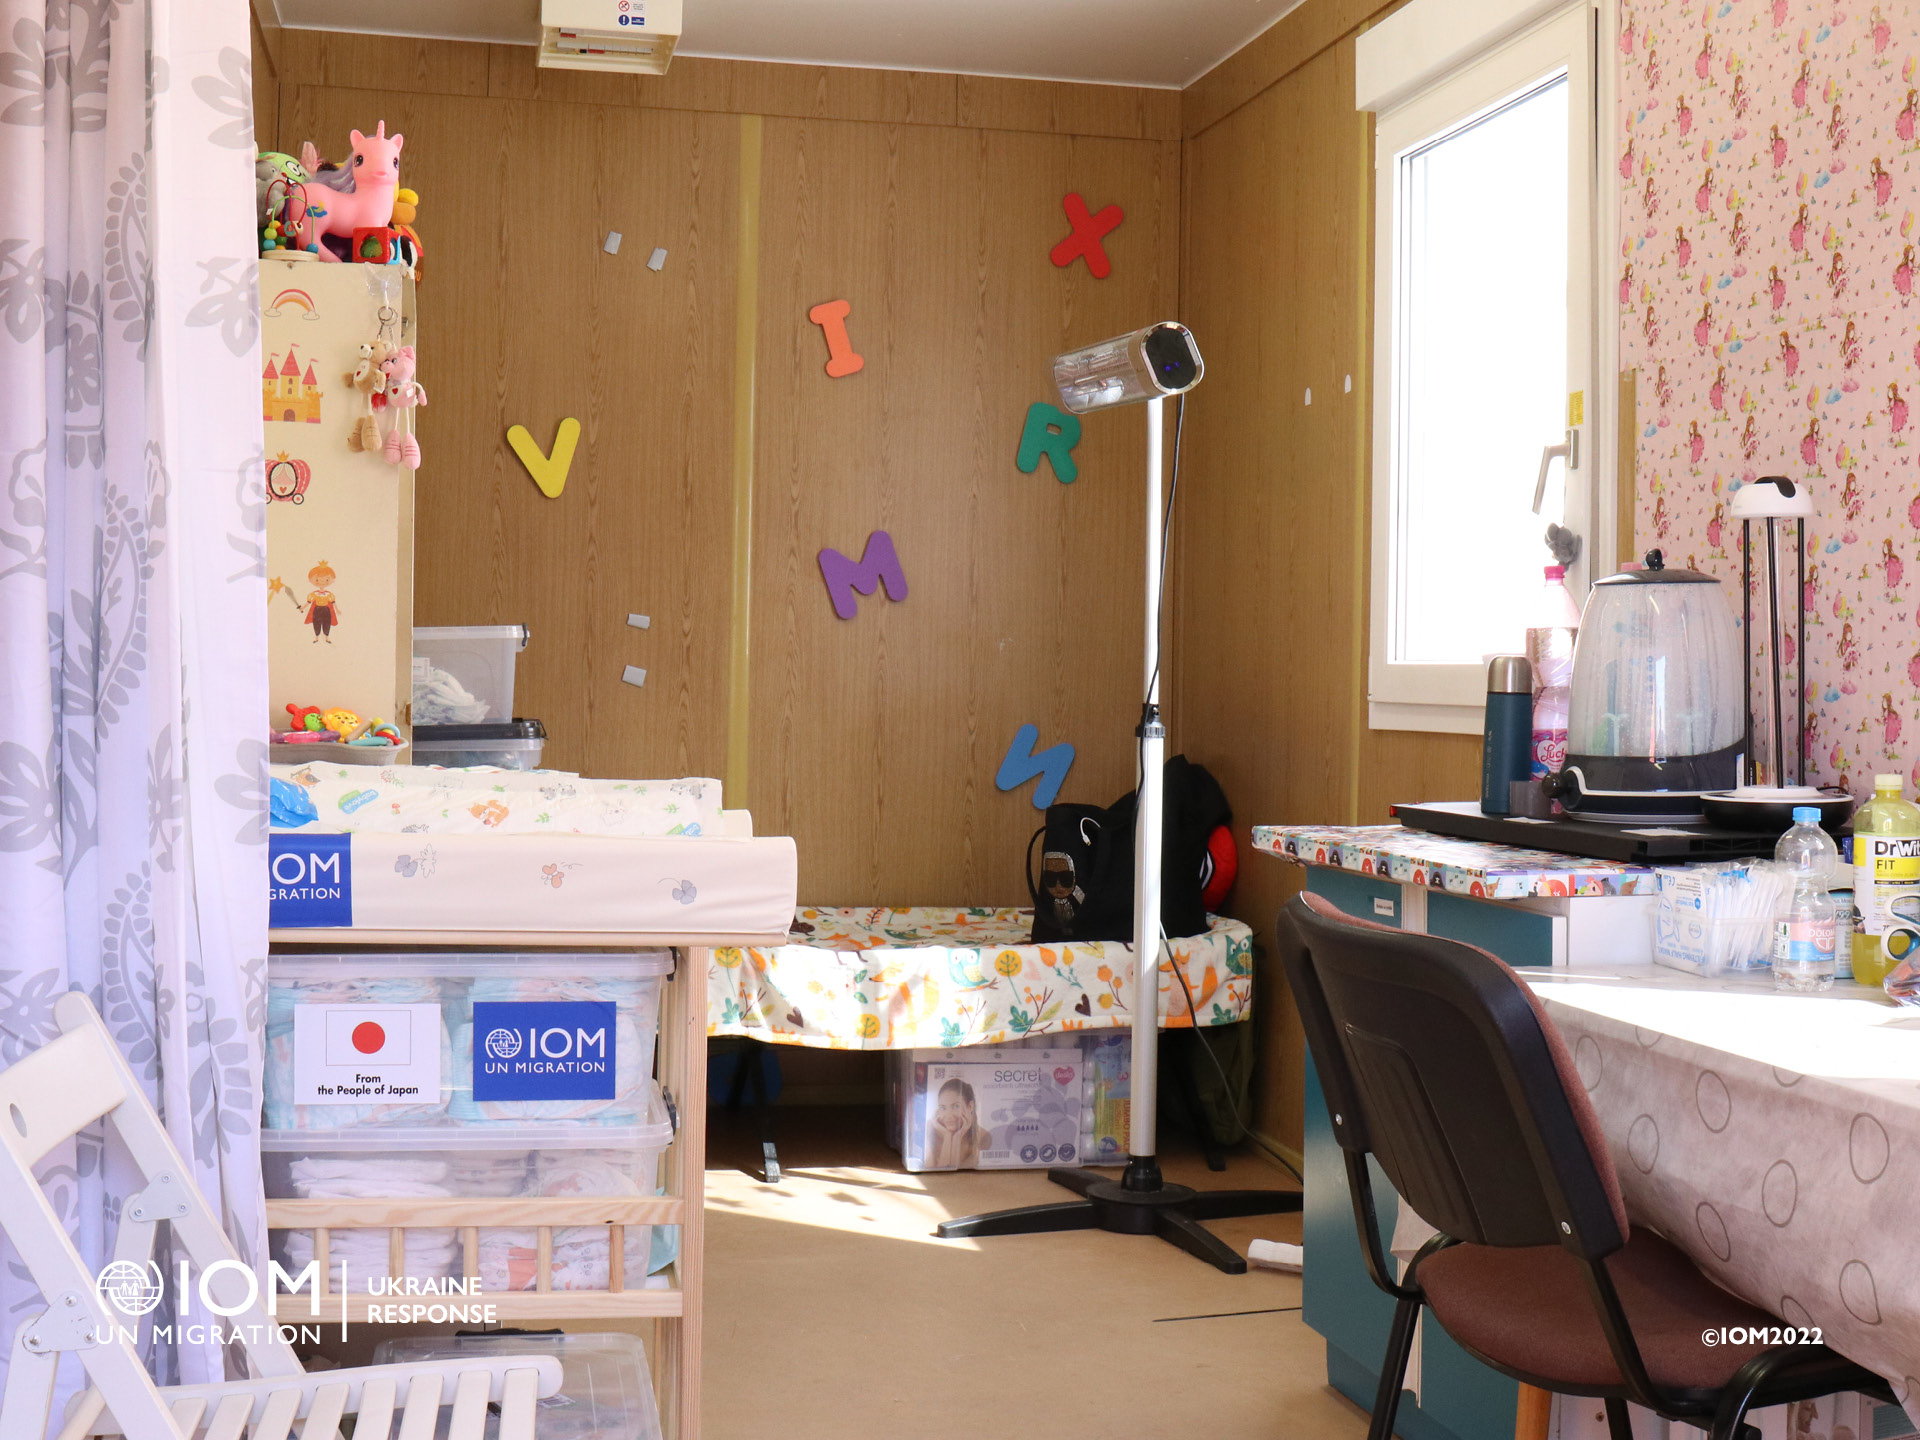 The breastfeeding and baby care room with equipment. Photo © International Organization for Migration (IOM) 2022.